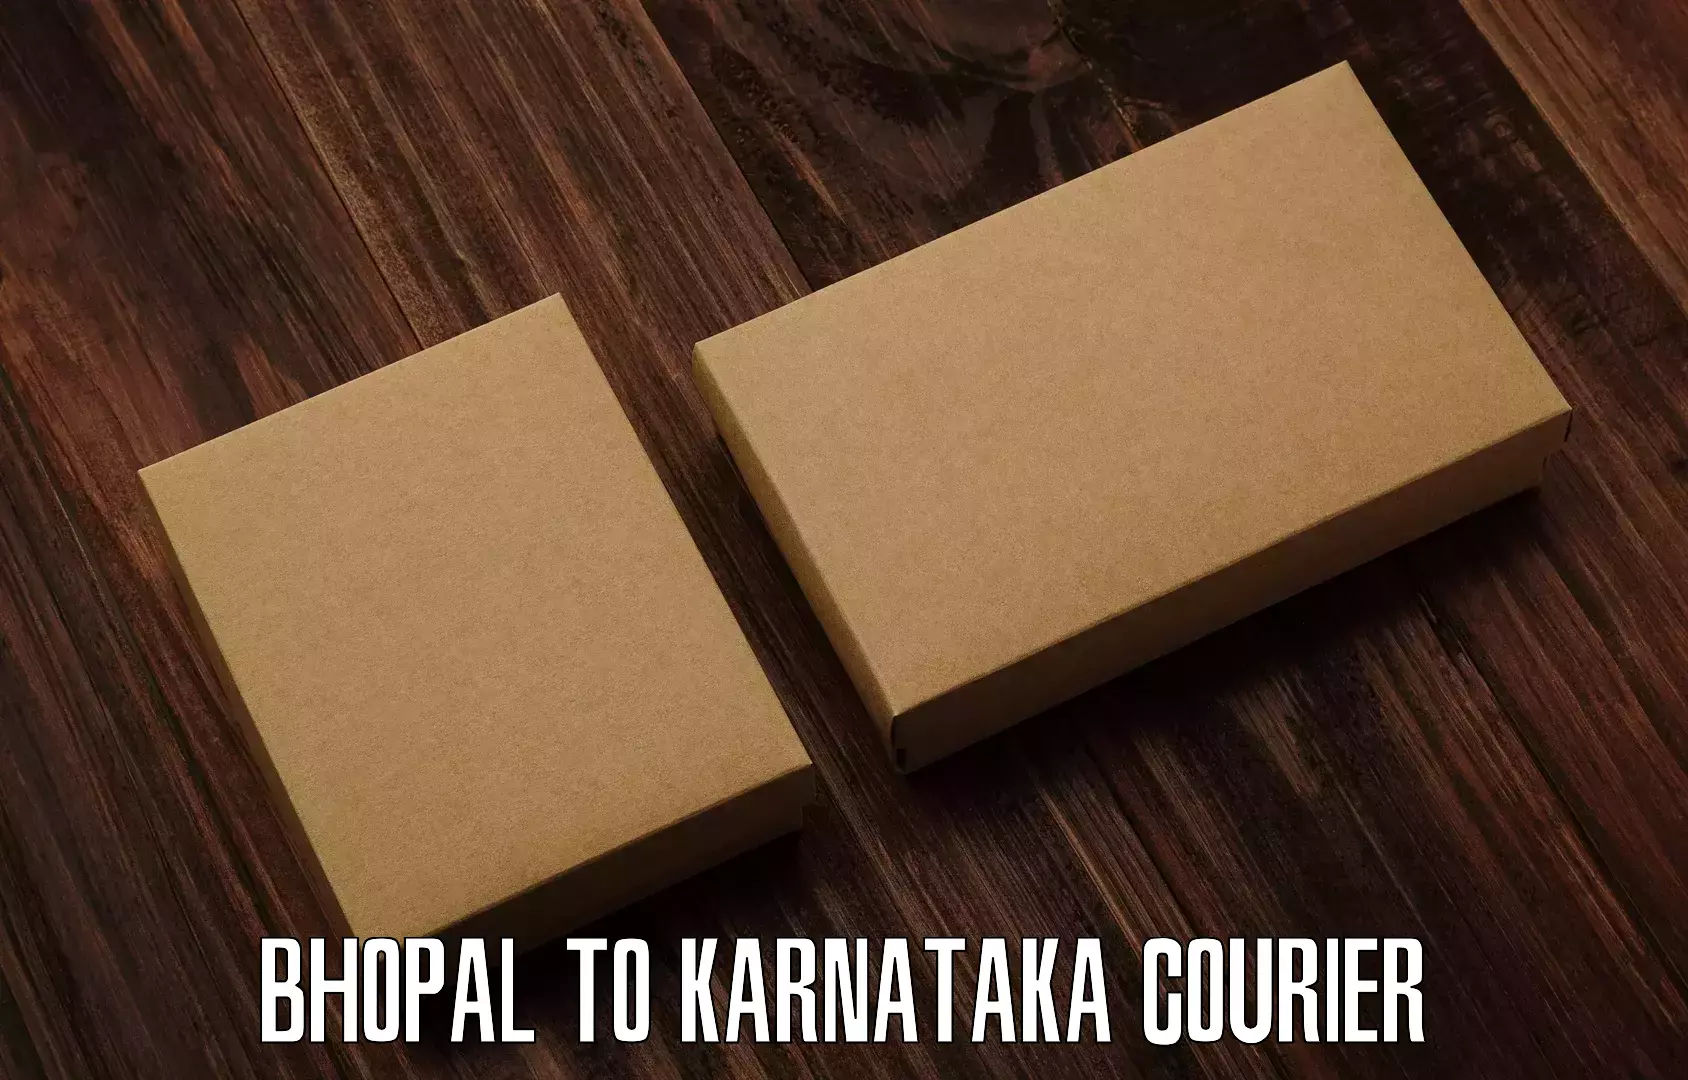 Same-day delivery options Bhopal to Hagaribommanahalli